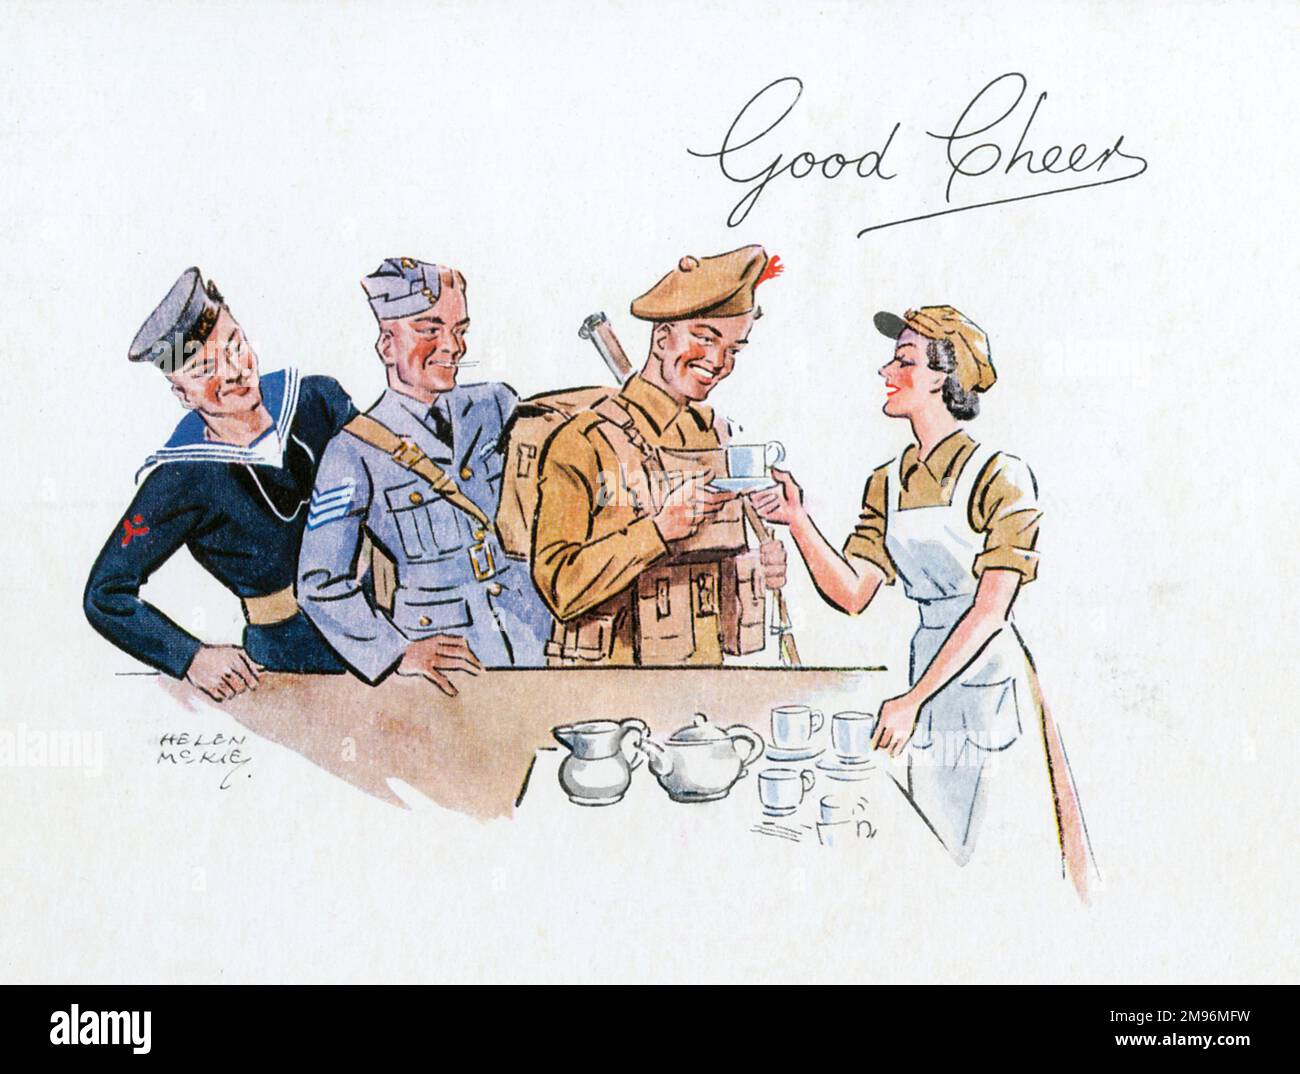 Jolly illustration by Helen McKie showing a female ATS worker serving cups of tea to a sailor, an airman and a soldier during World War II. Stock Photo